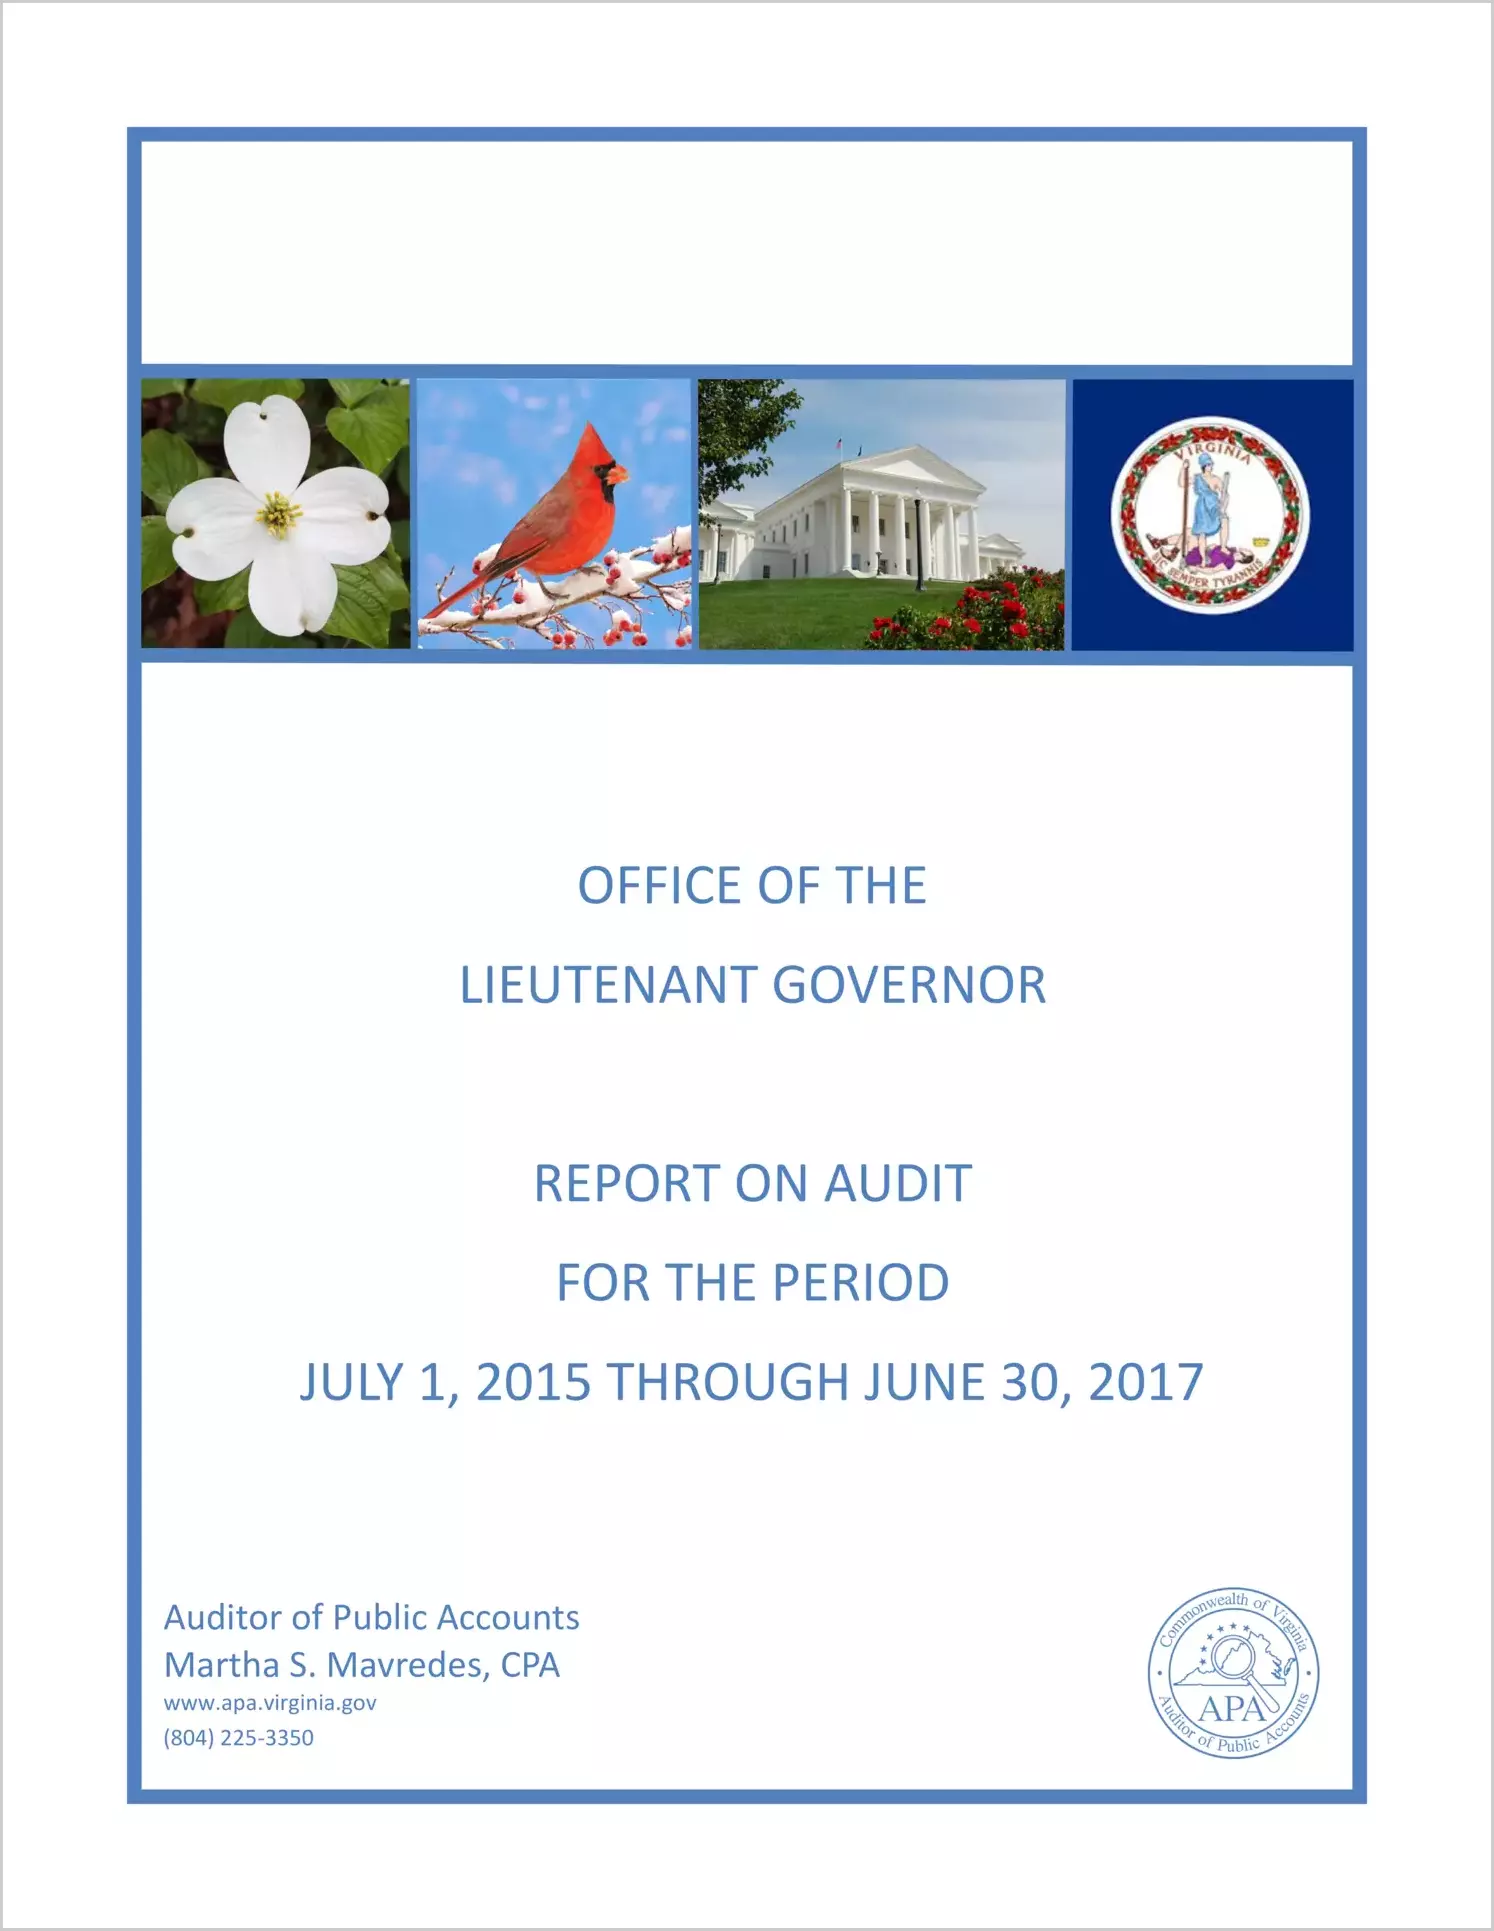 Office of the Lieutenant Governor for the period July 1, 2015 through June 30, 2017